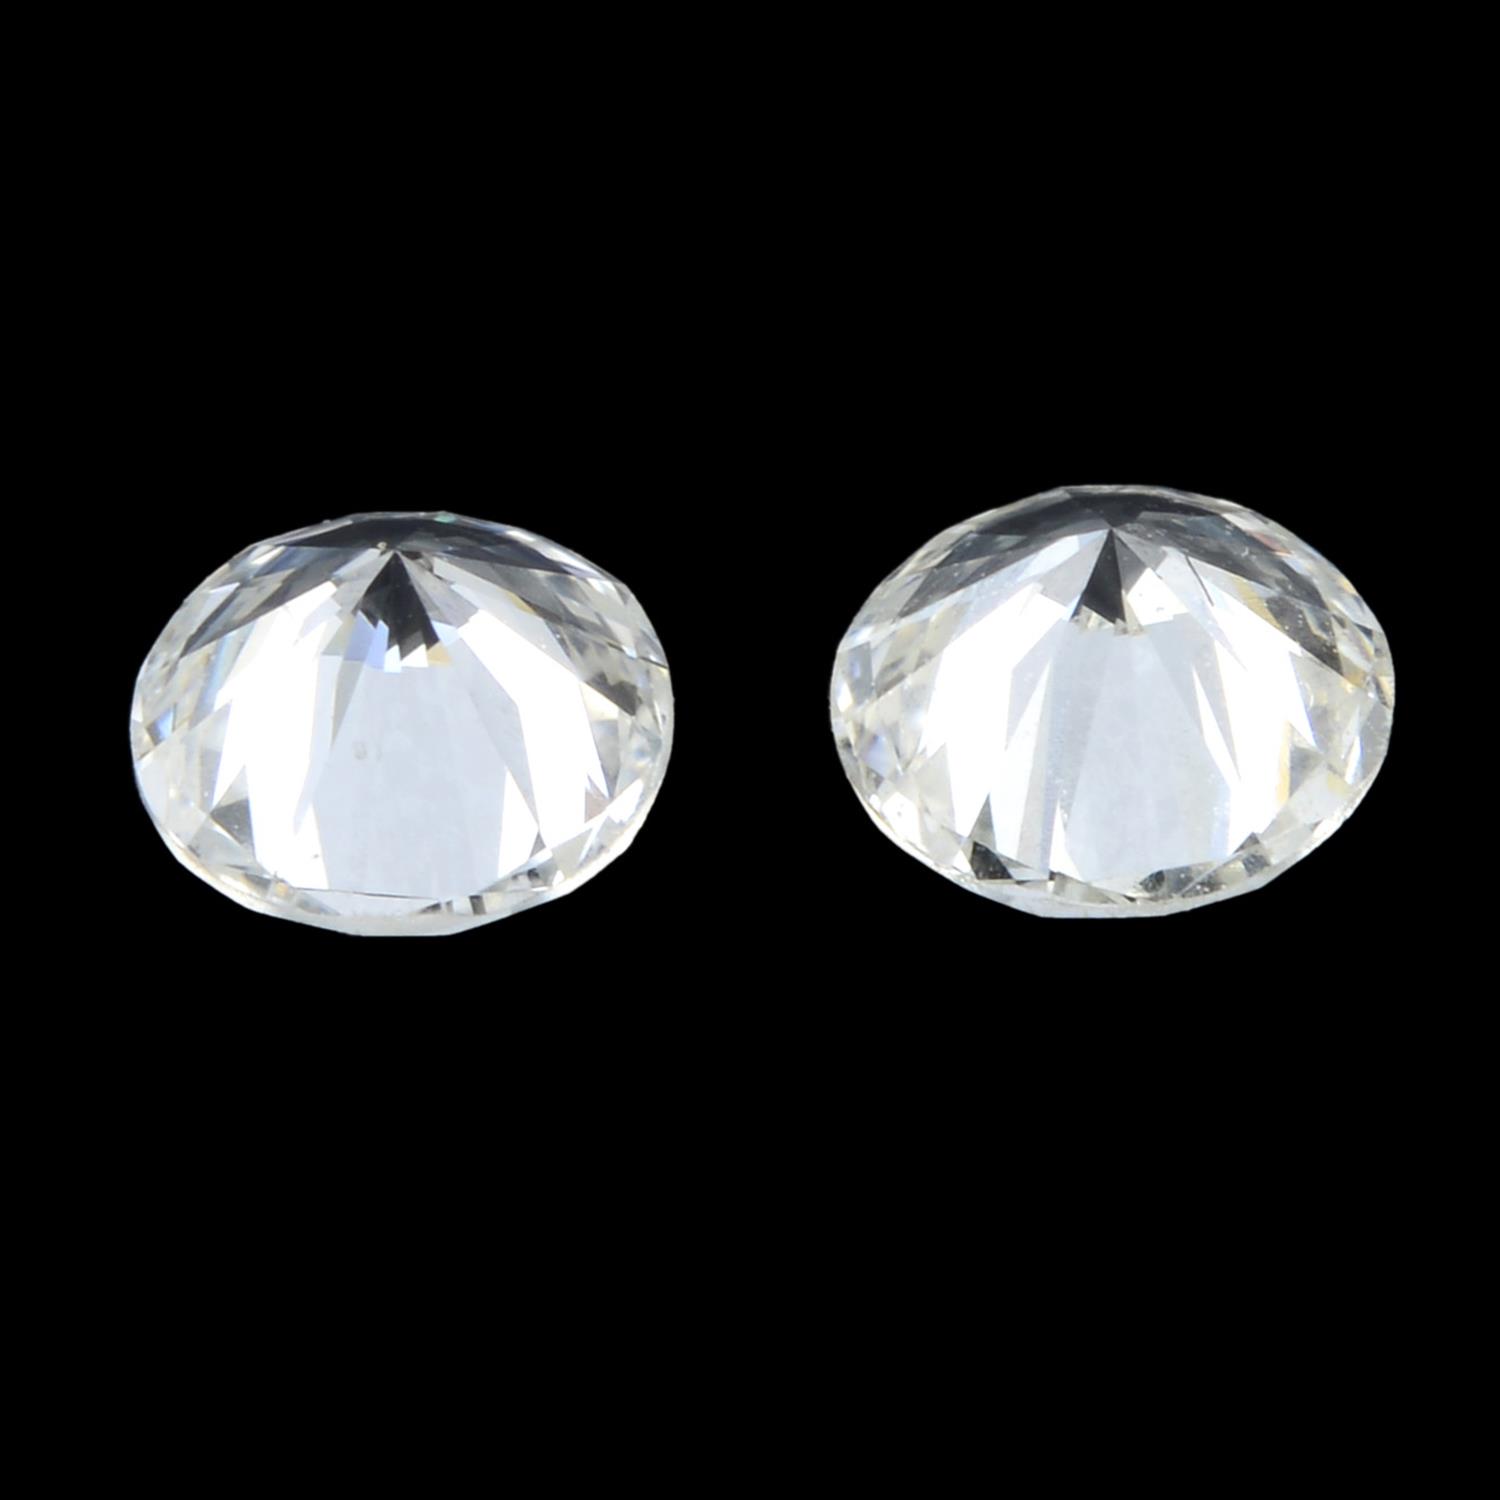 Pair of brilliant cut diamonds weighing 0.58ct - Image 2 of 2